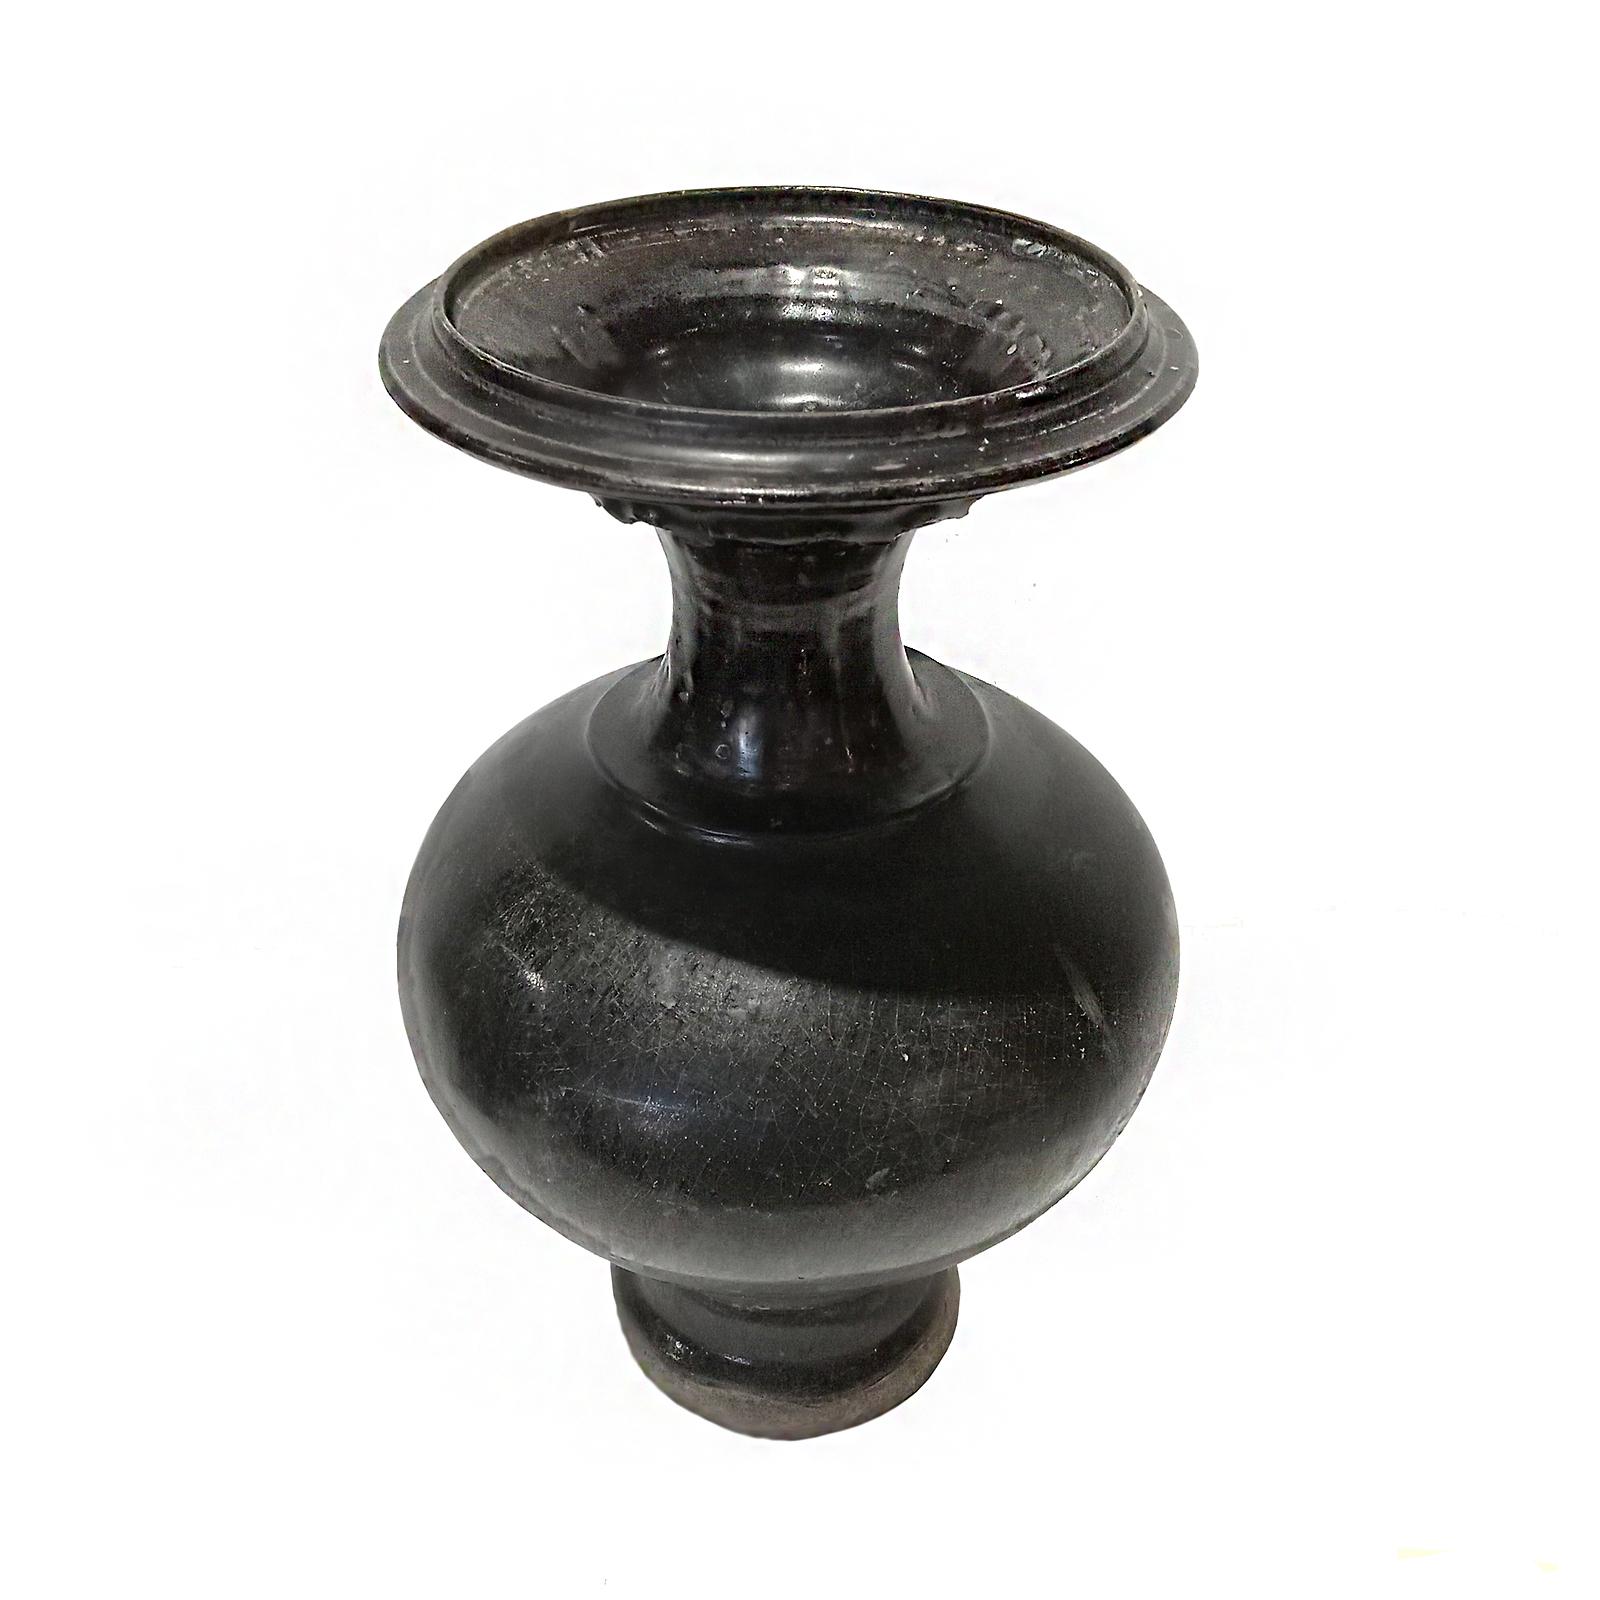 A Thai ceramic vase, glazed in black, early 20th Century. 

Natural clay / earthenware, same material originally used in ancient kilns of Sawankhalok, one of the two main centers of old Thai ceramics. 

Narrow neck with a wide top, curved round body